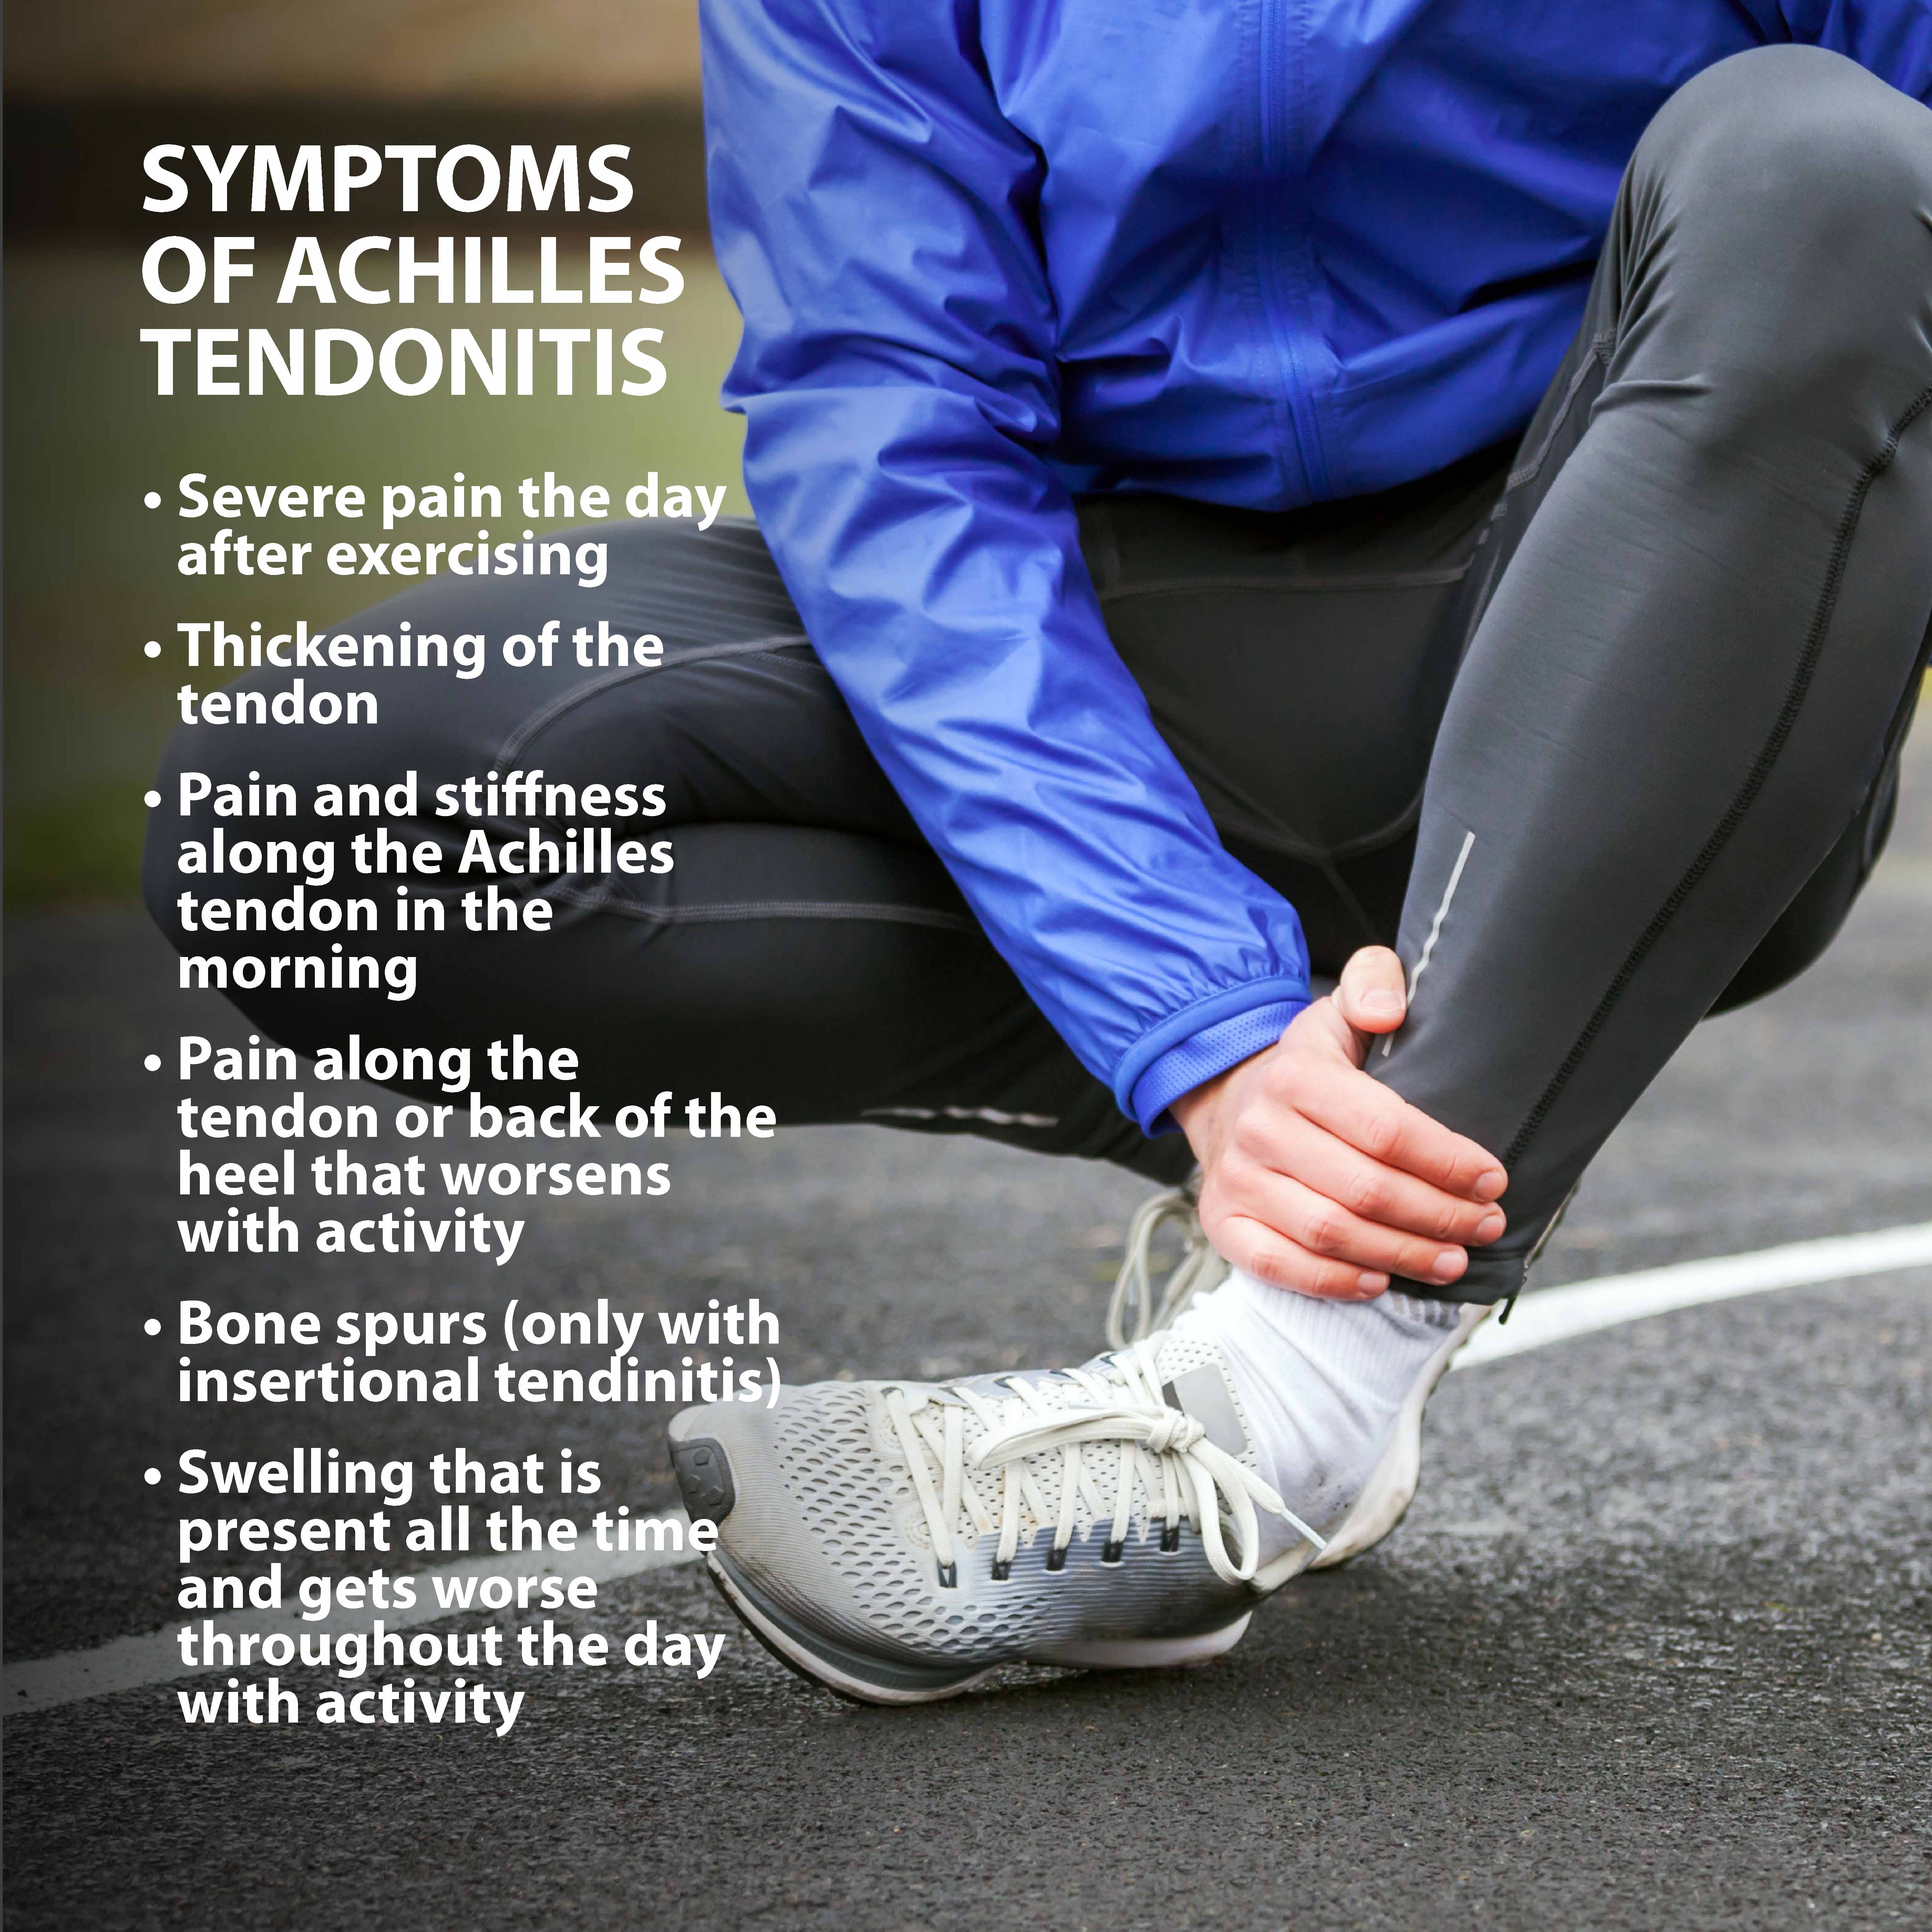 What are 2 signs of Achilles tendonitis?